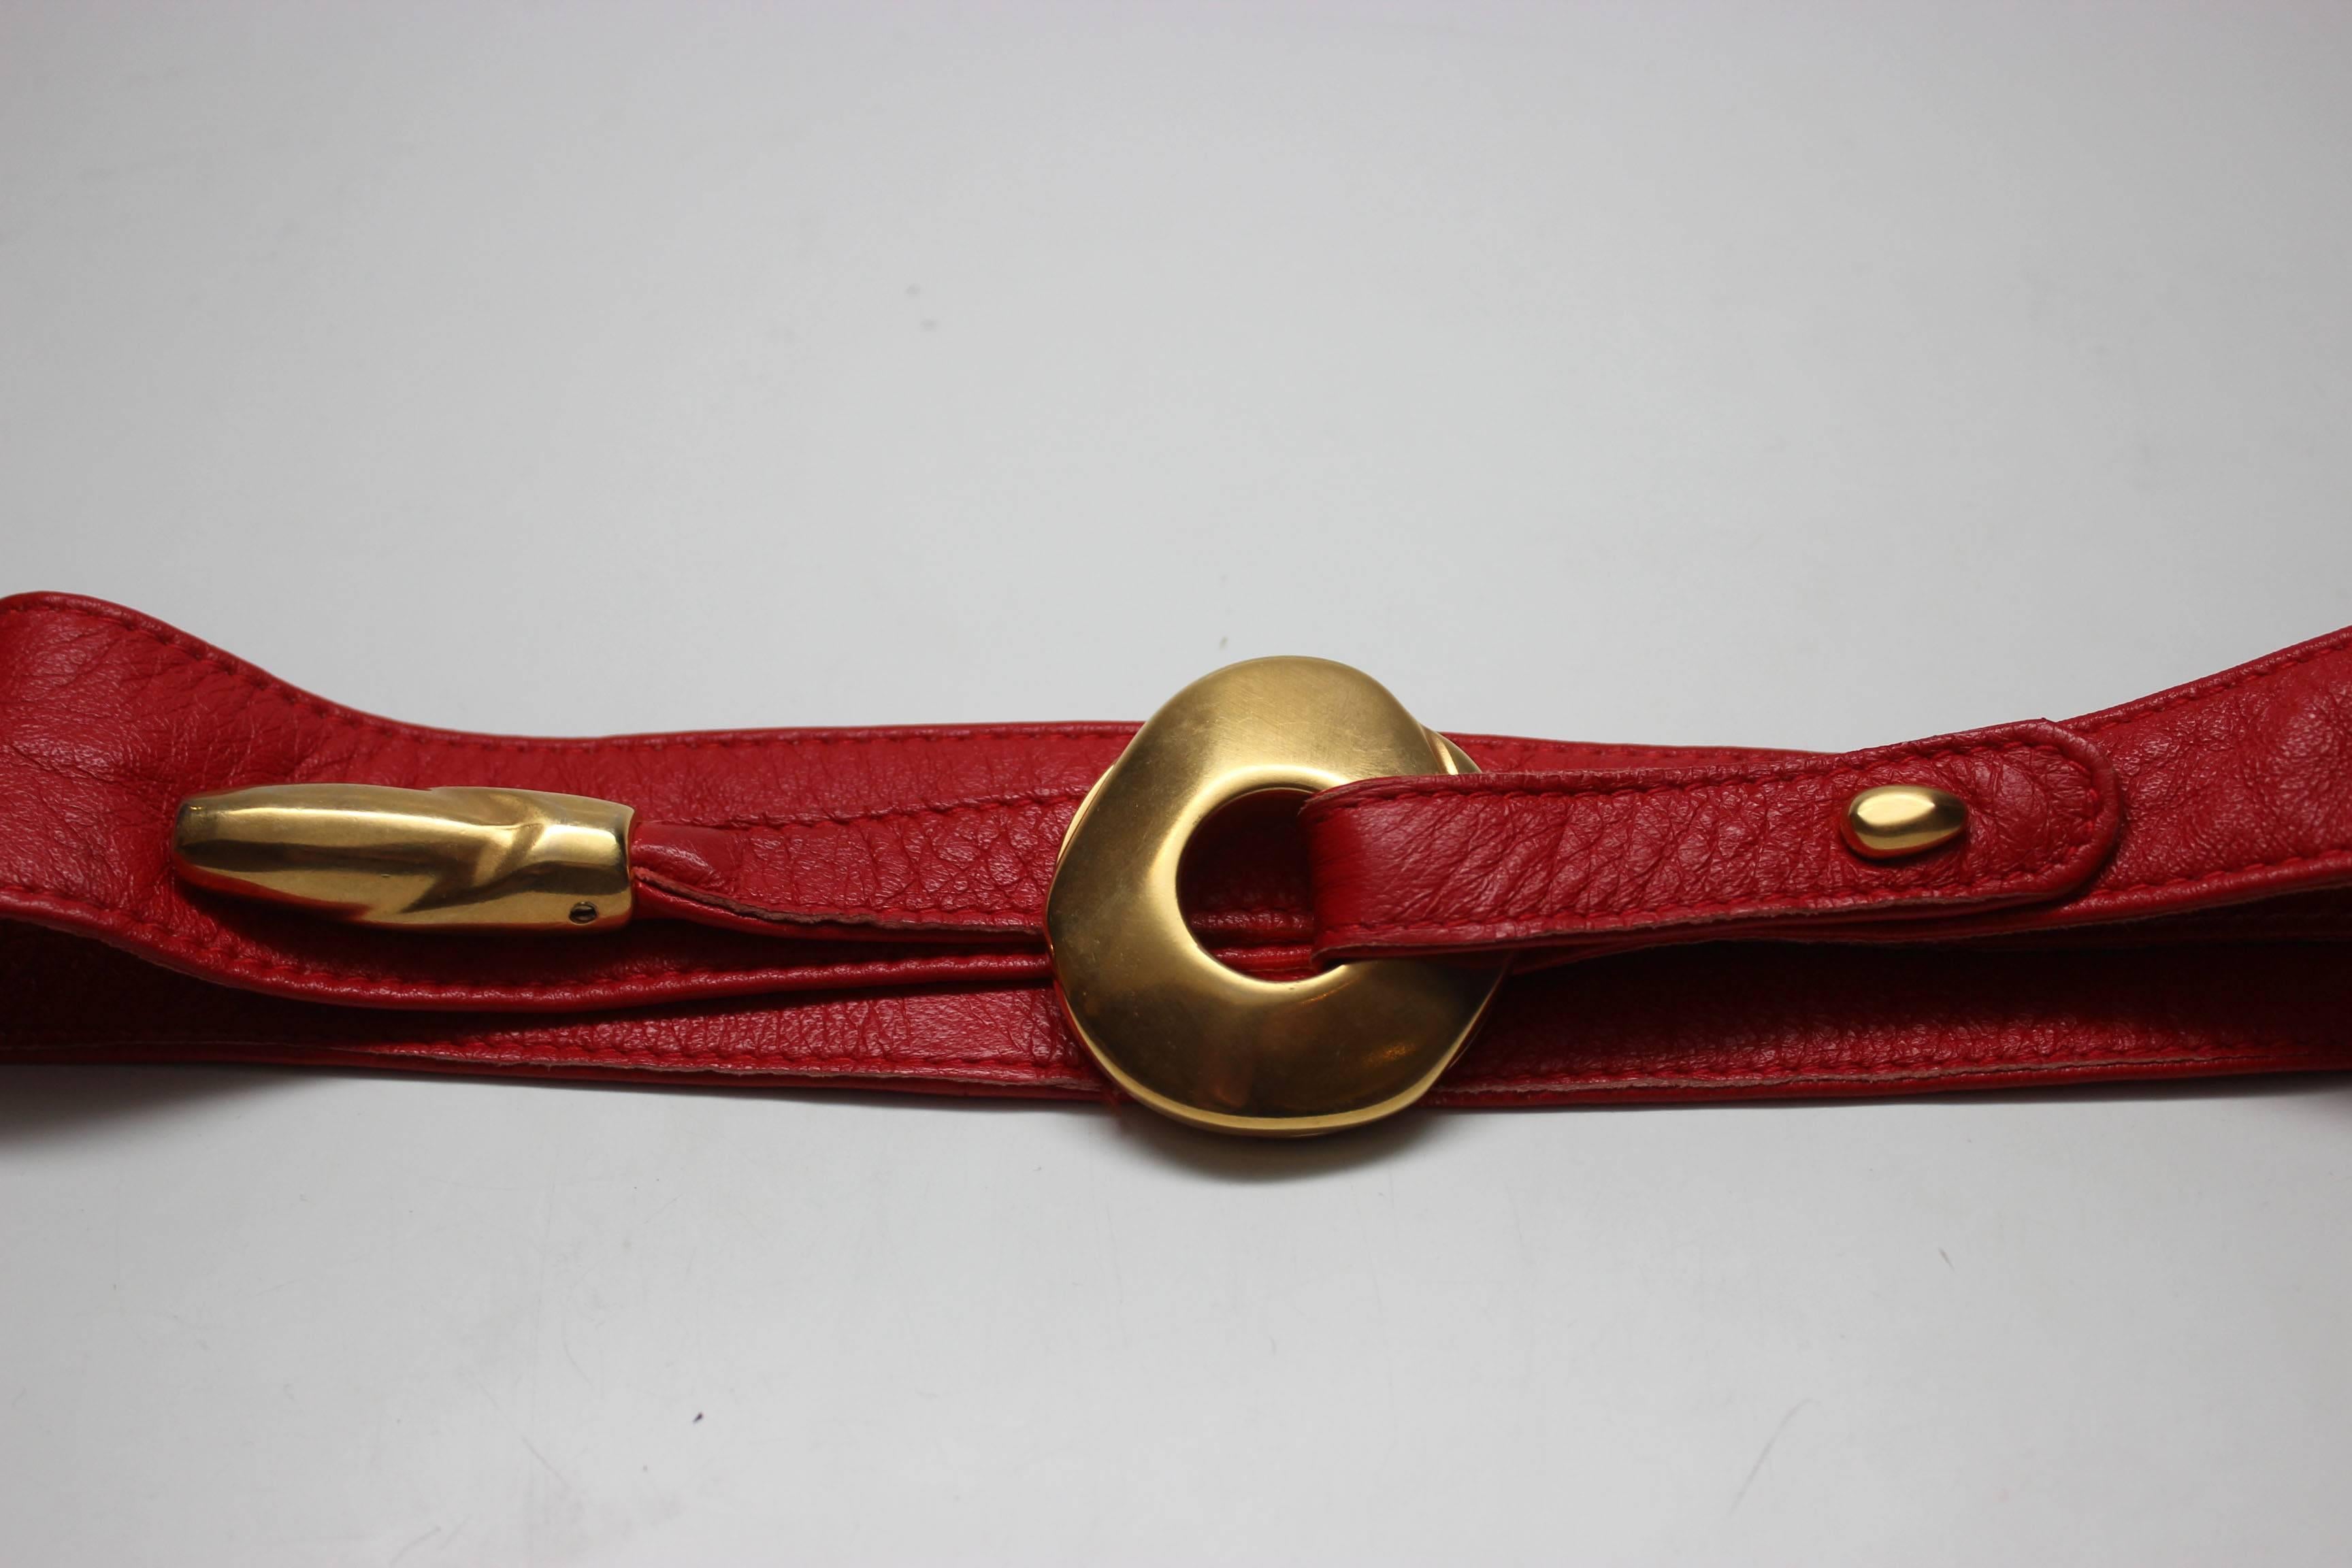 Donna Karan 1980s Red Leather Belt with Sculptural Hardware In Excellent Condition For Sale In New York, NY